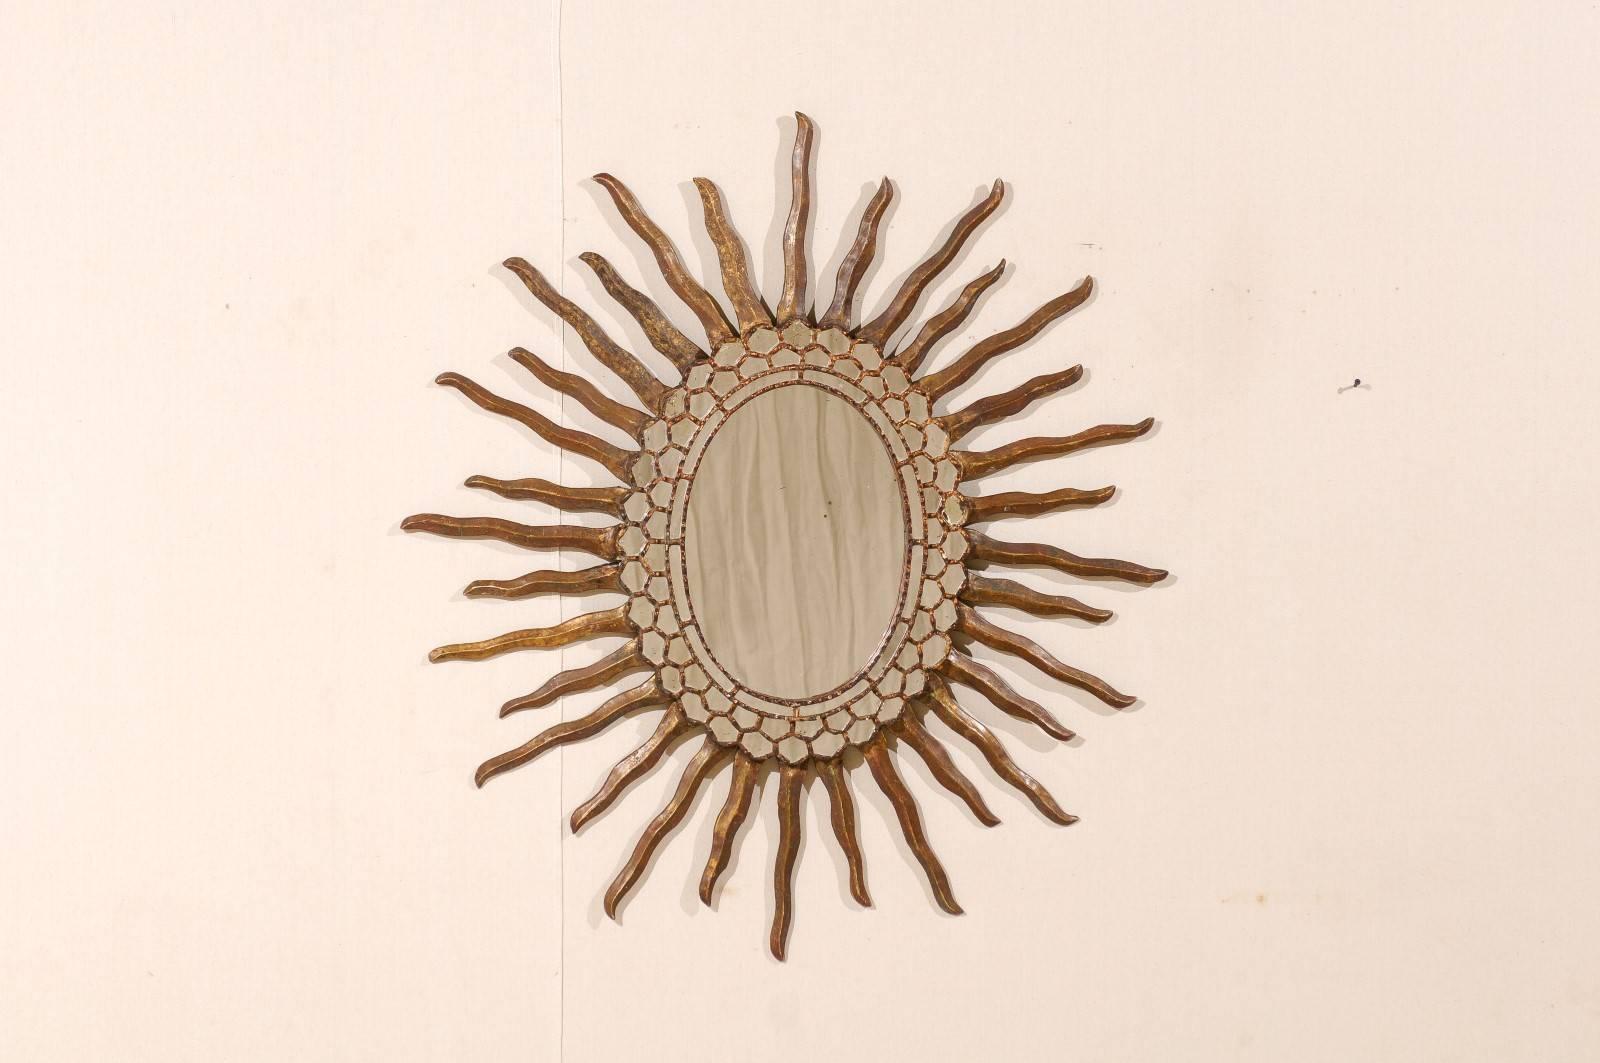 A Spanish antiqued oval shaped sunburst mirror with intricate surround. This Spanish 20th century mirror features a wooden surround in a nice rusty bronze and gold finish. The centre glass is accentuated with a series of concentric rings which are